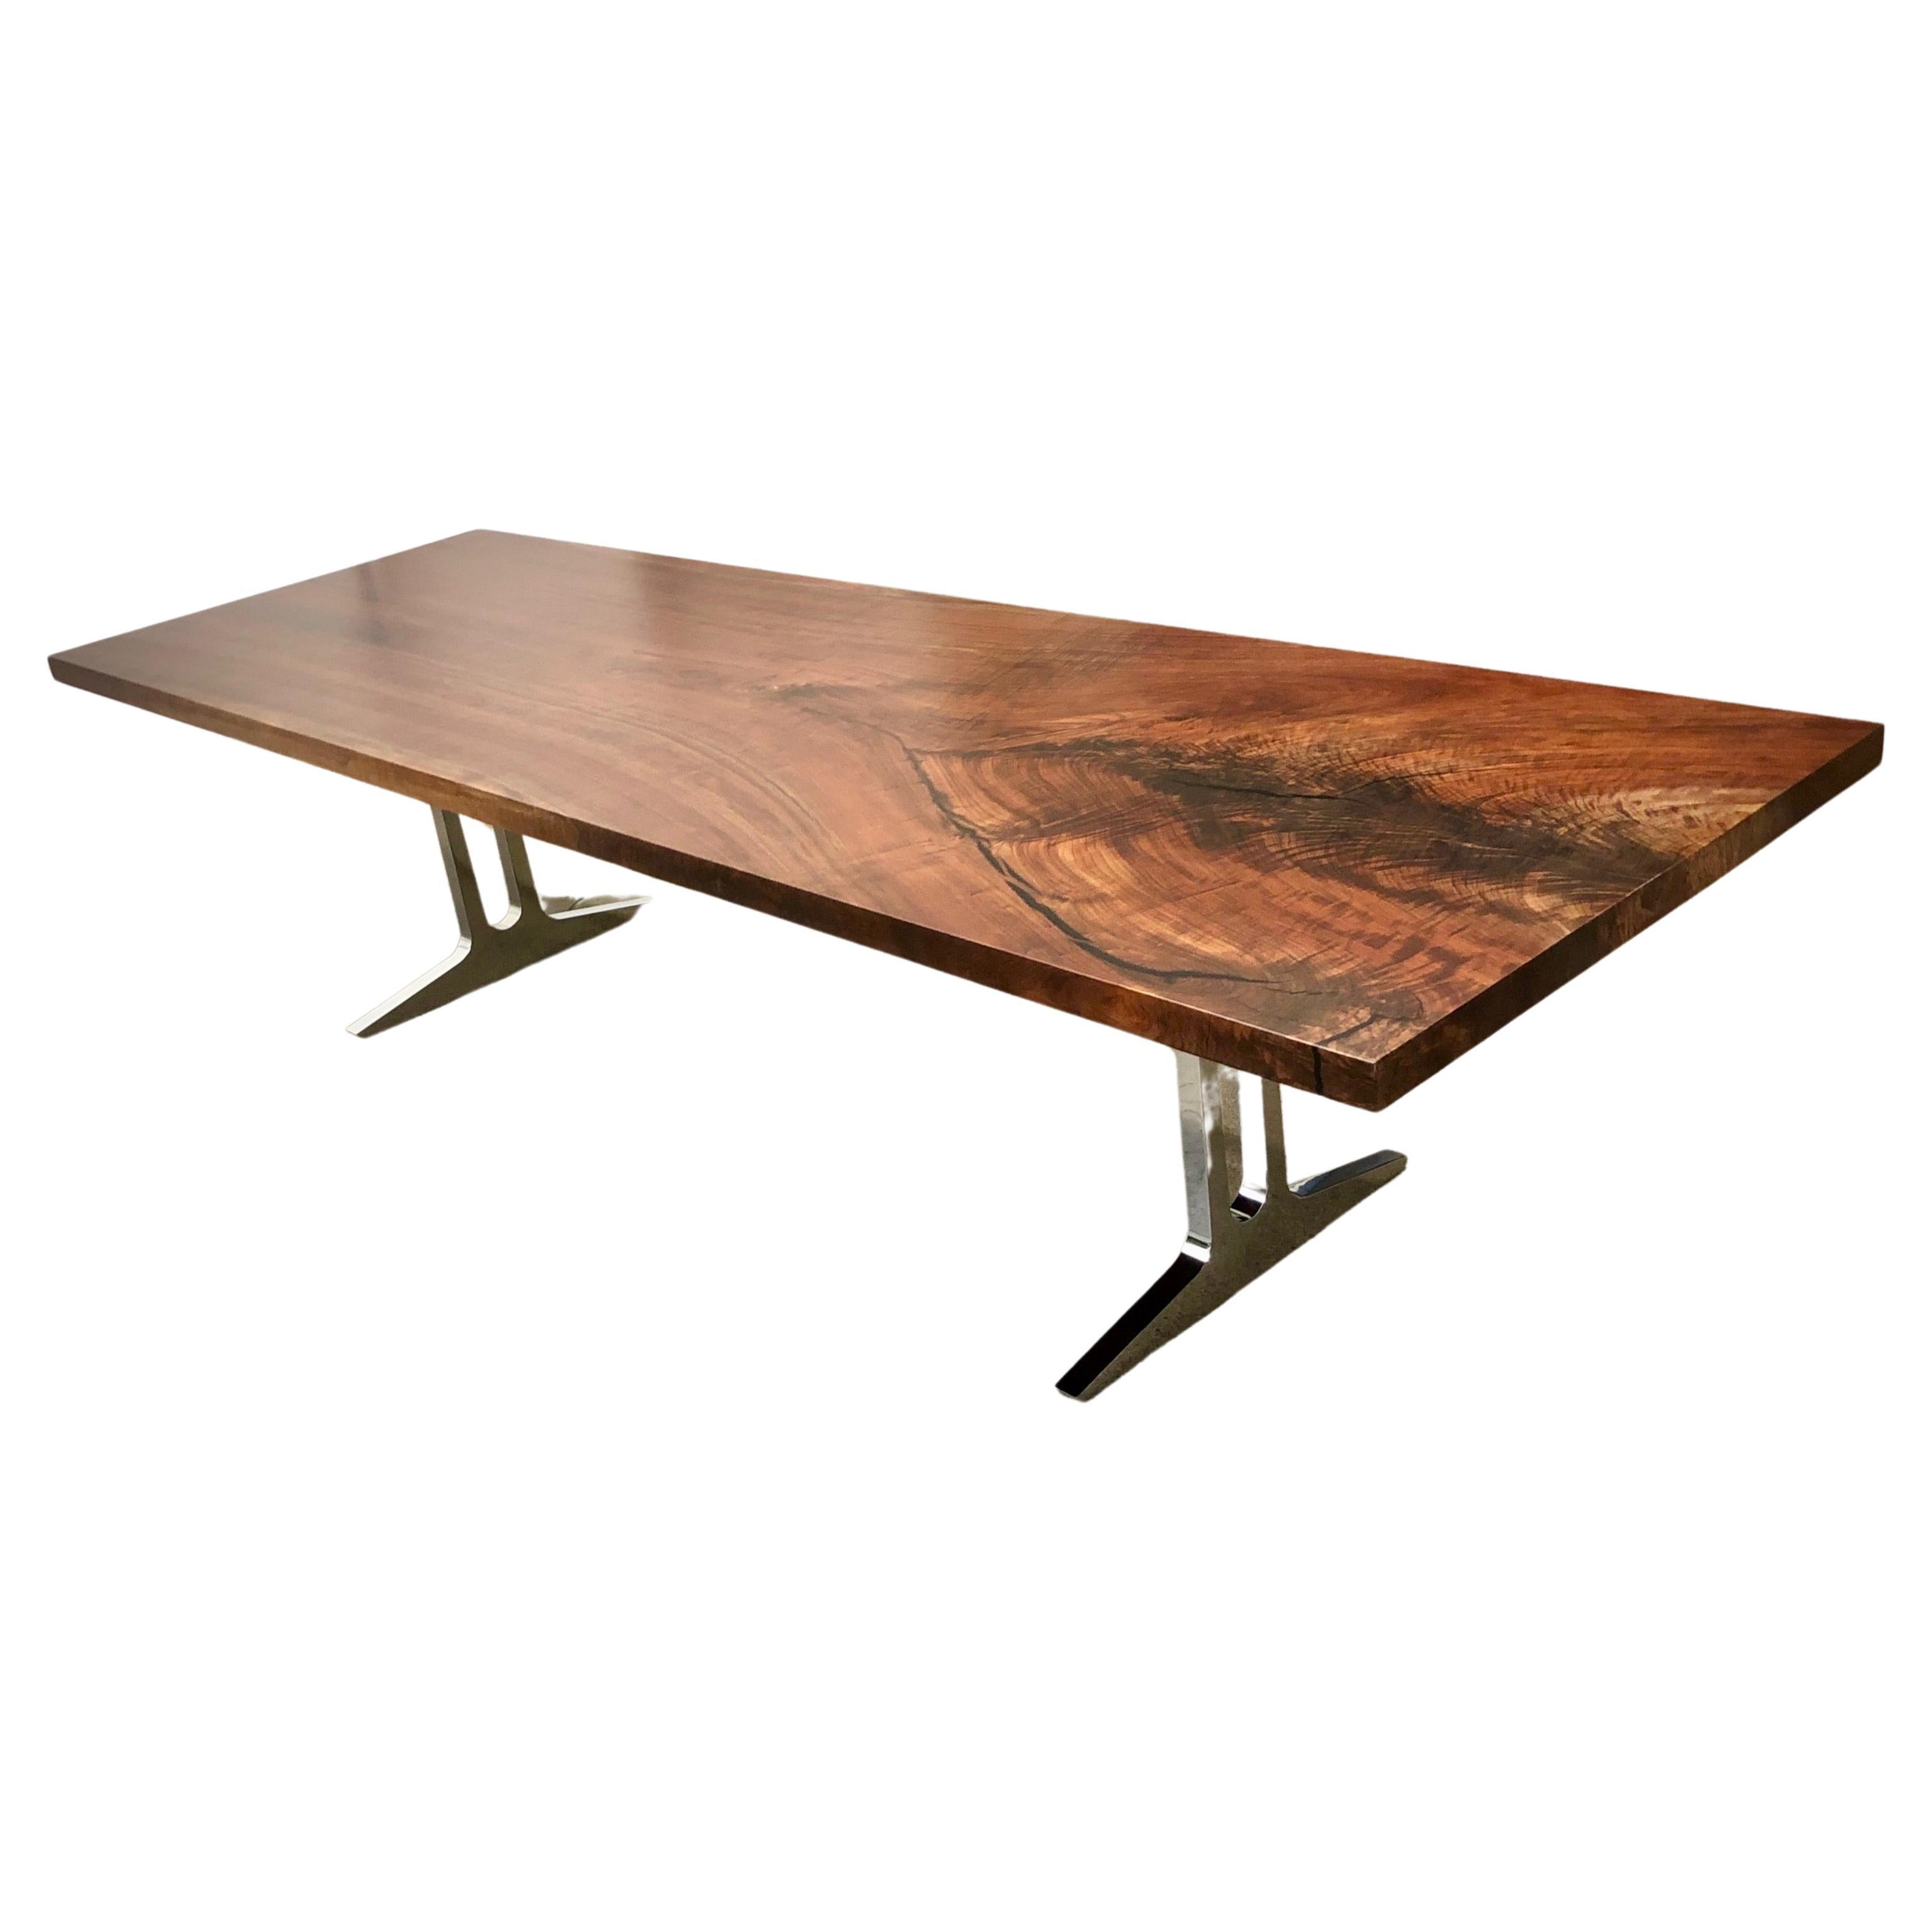 Single slab walnut dining table with mirror polished aluminum "Pi" legs For Sale